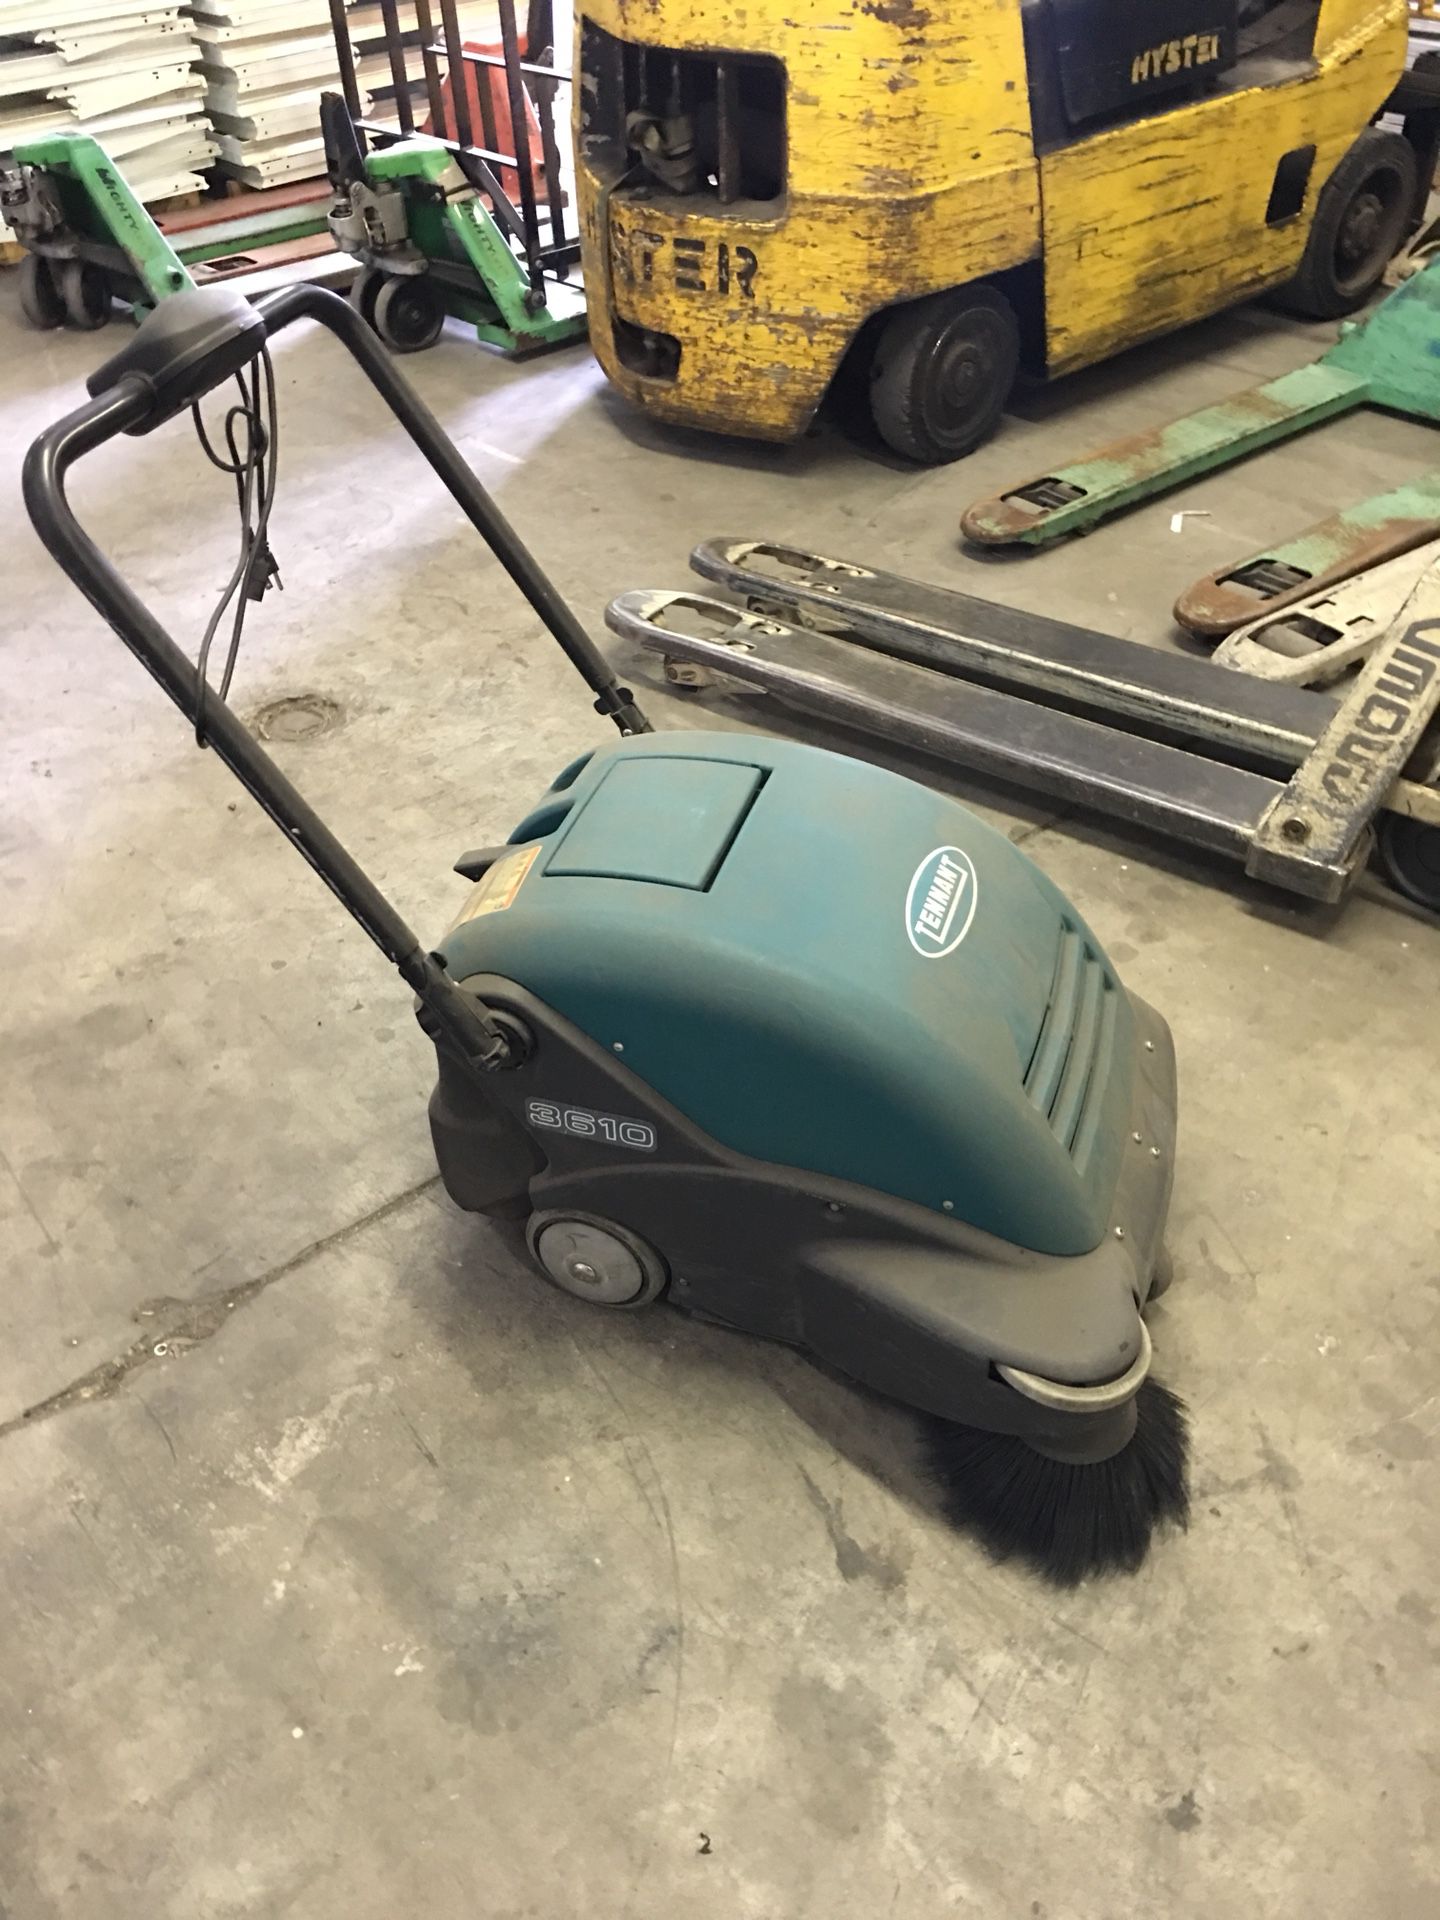 Floor scrubbers and buffers